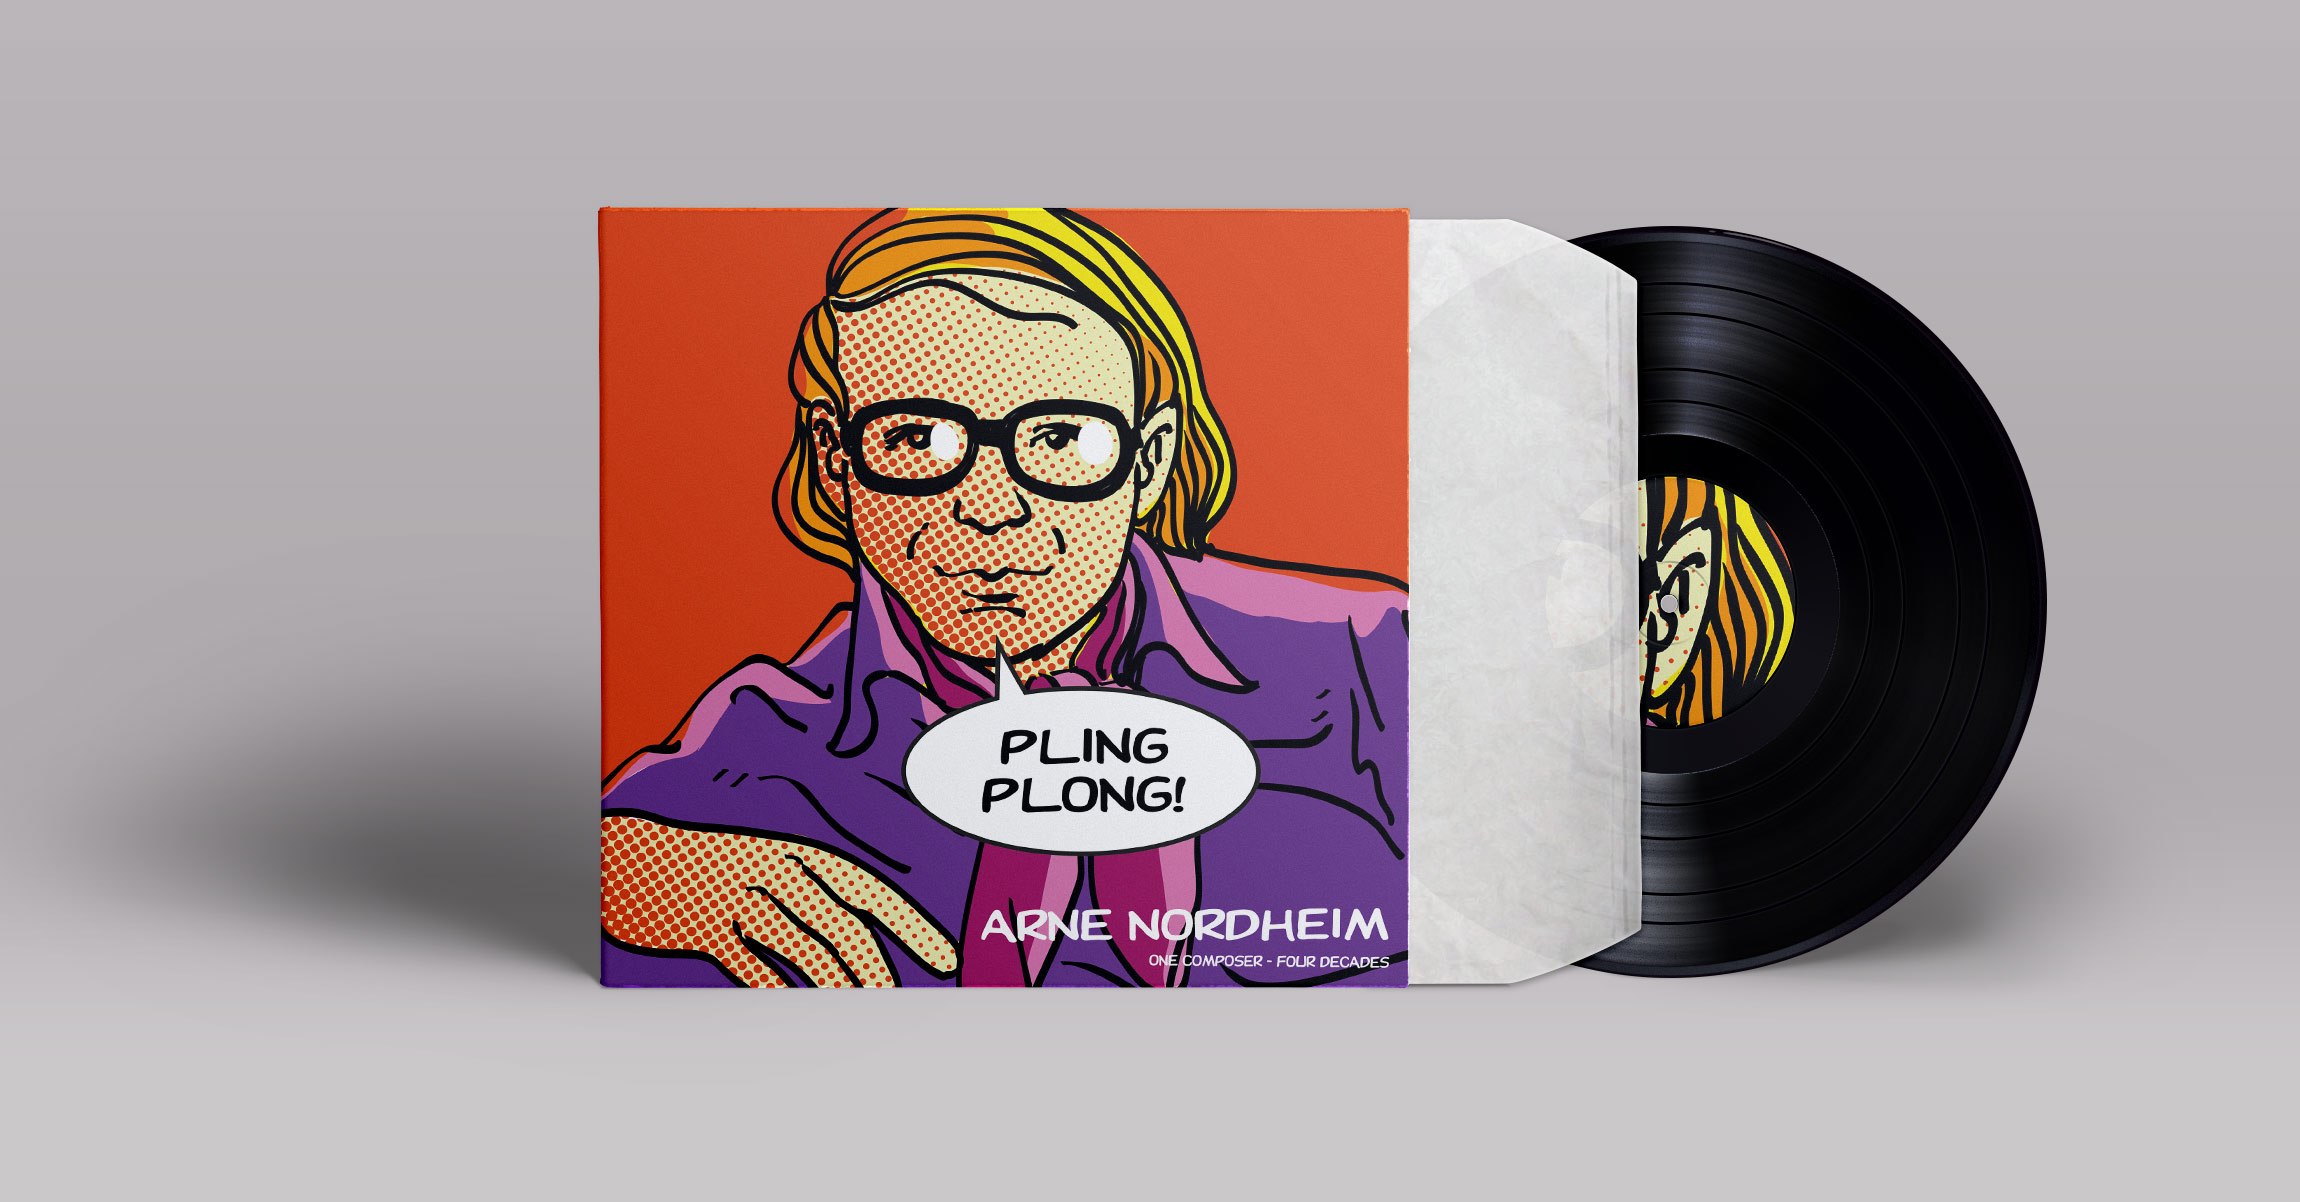 Post web reform Vinyl Album Covers with Awesome Pop Art Design - UnifiedManufacturing